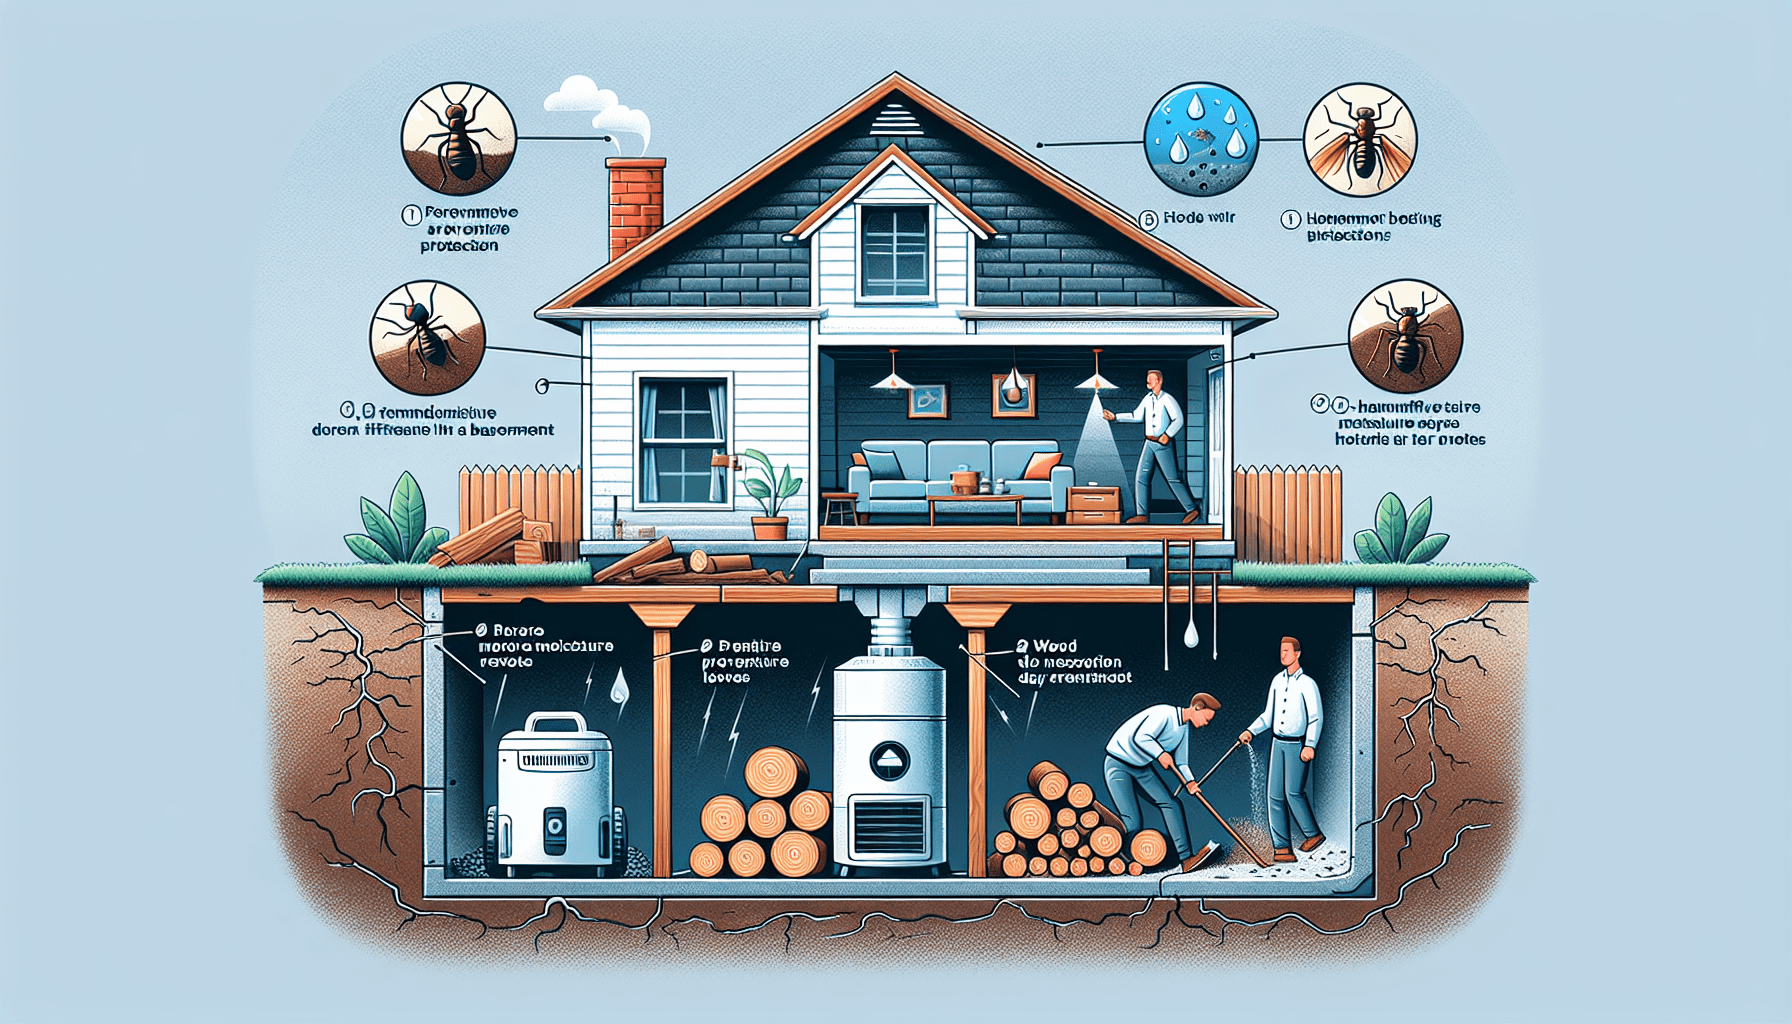 Illustration of preventative measures for long-term termite protection